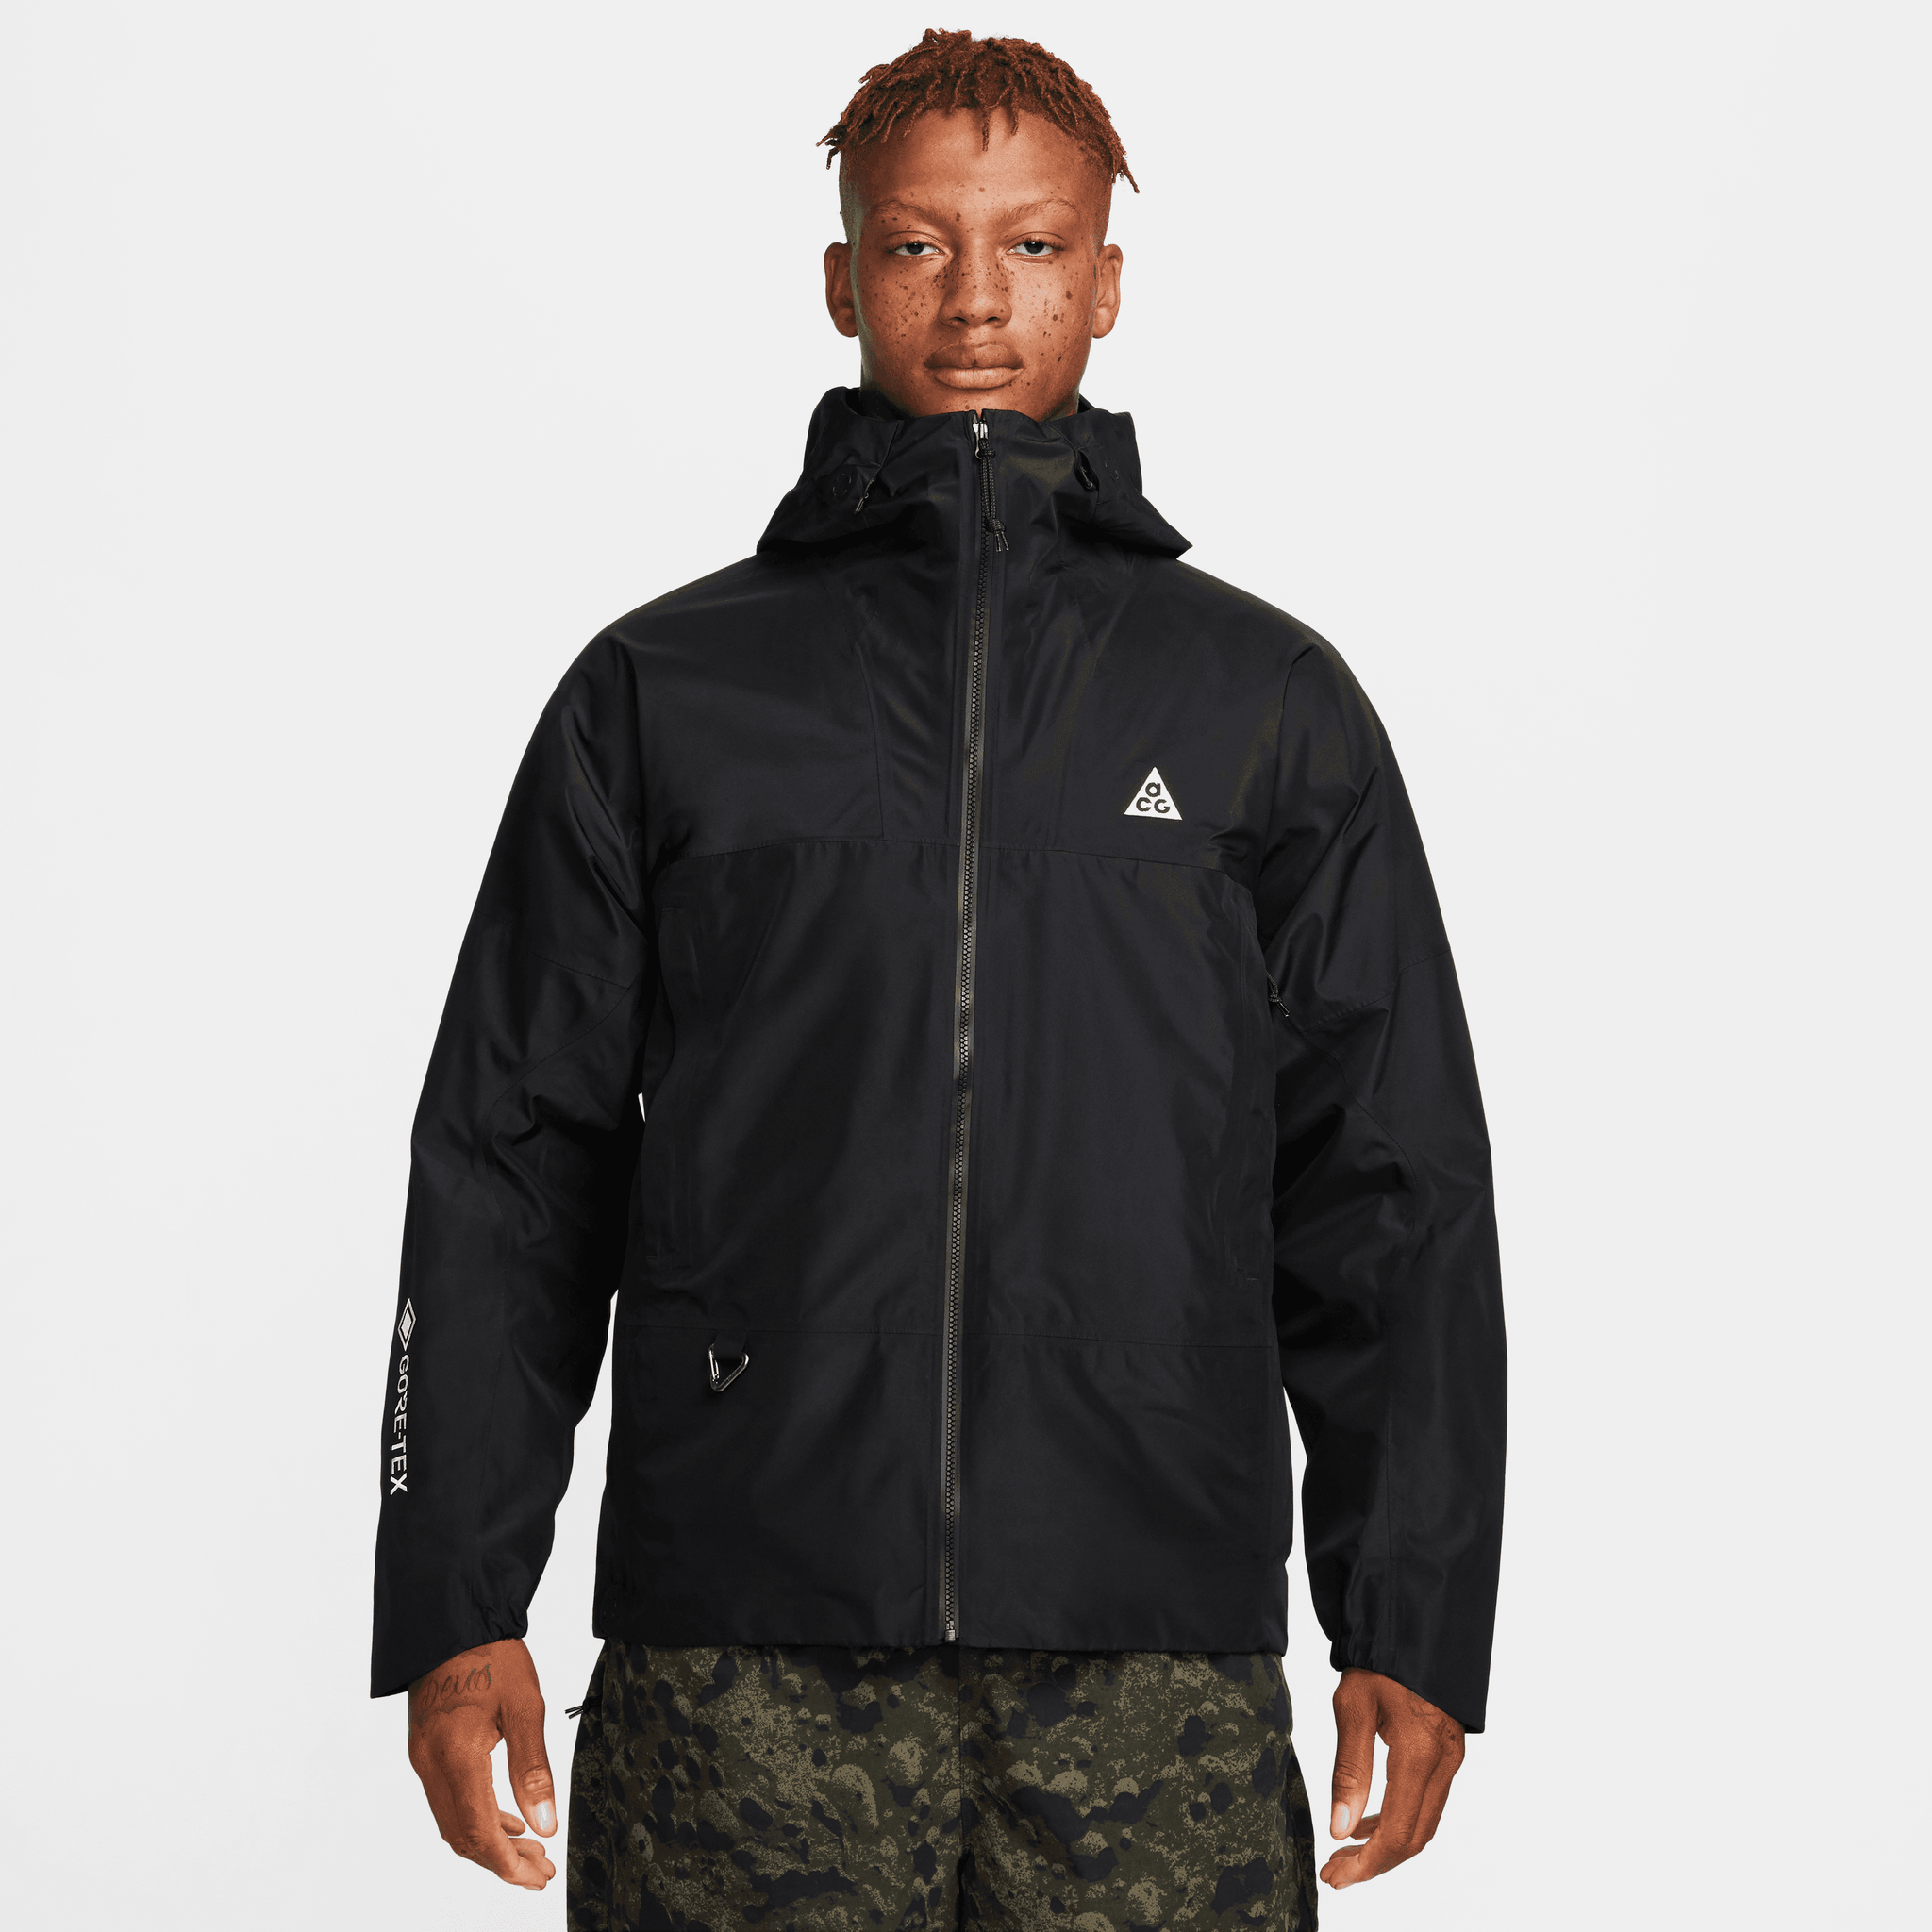 Storm-Fit AVD ACG "Chain of Craters" GTX Jacket